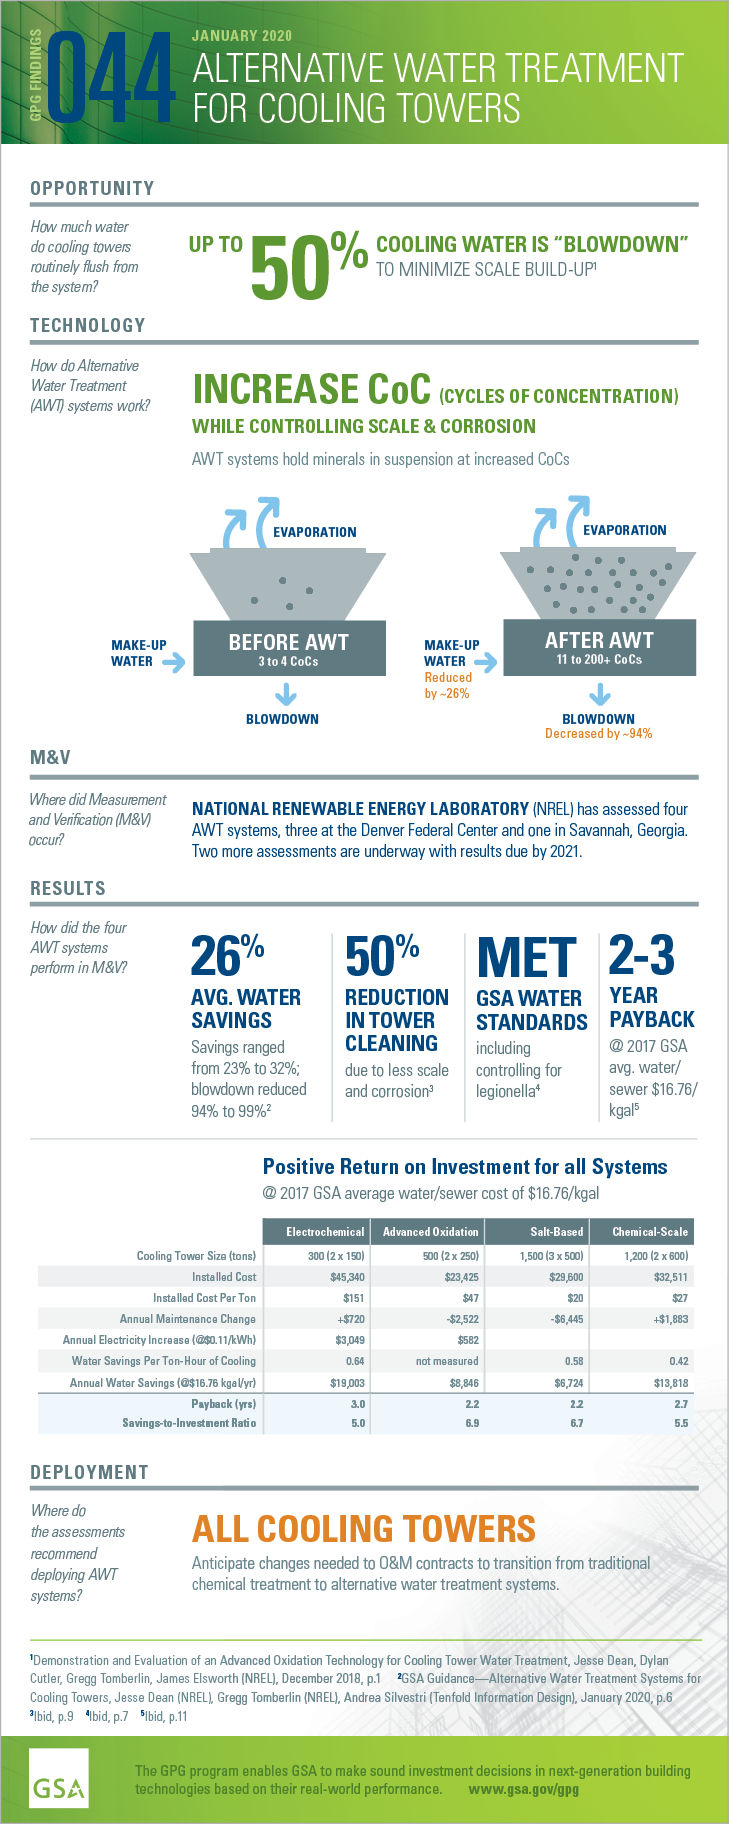 Download the PDF version of the full-sized infographic for GPG044 GSA Guidance for Cooling Towers.